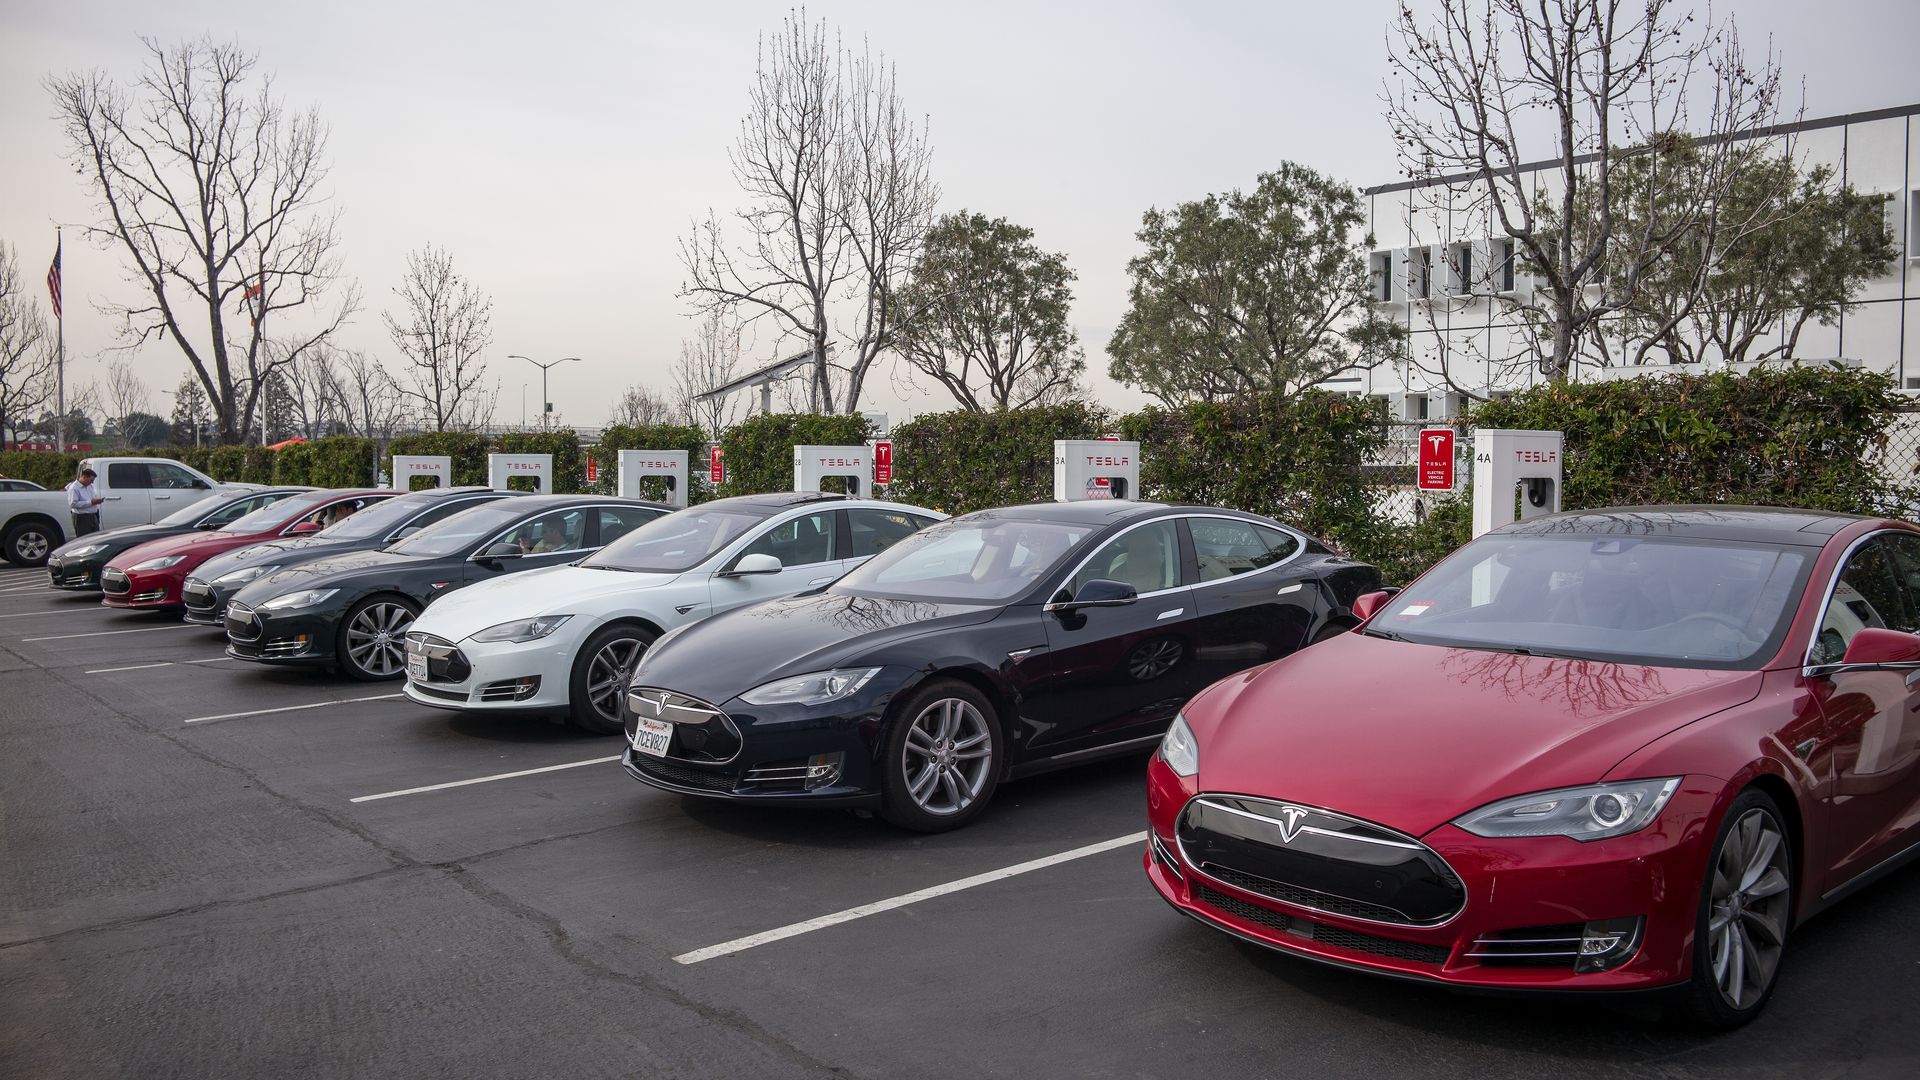 Cars charge at stations outside of Tesla's factory in Fremont